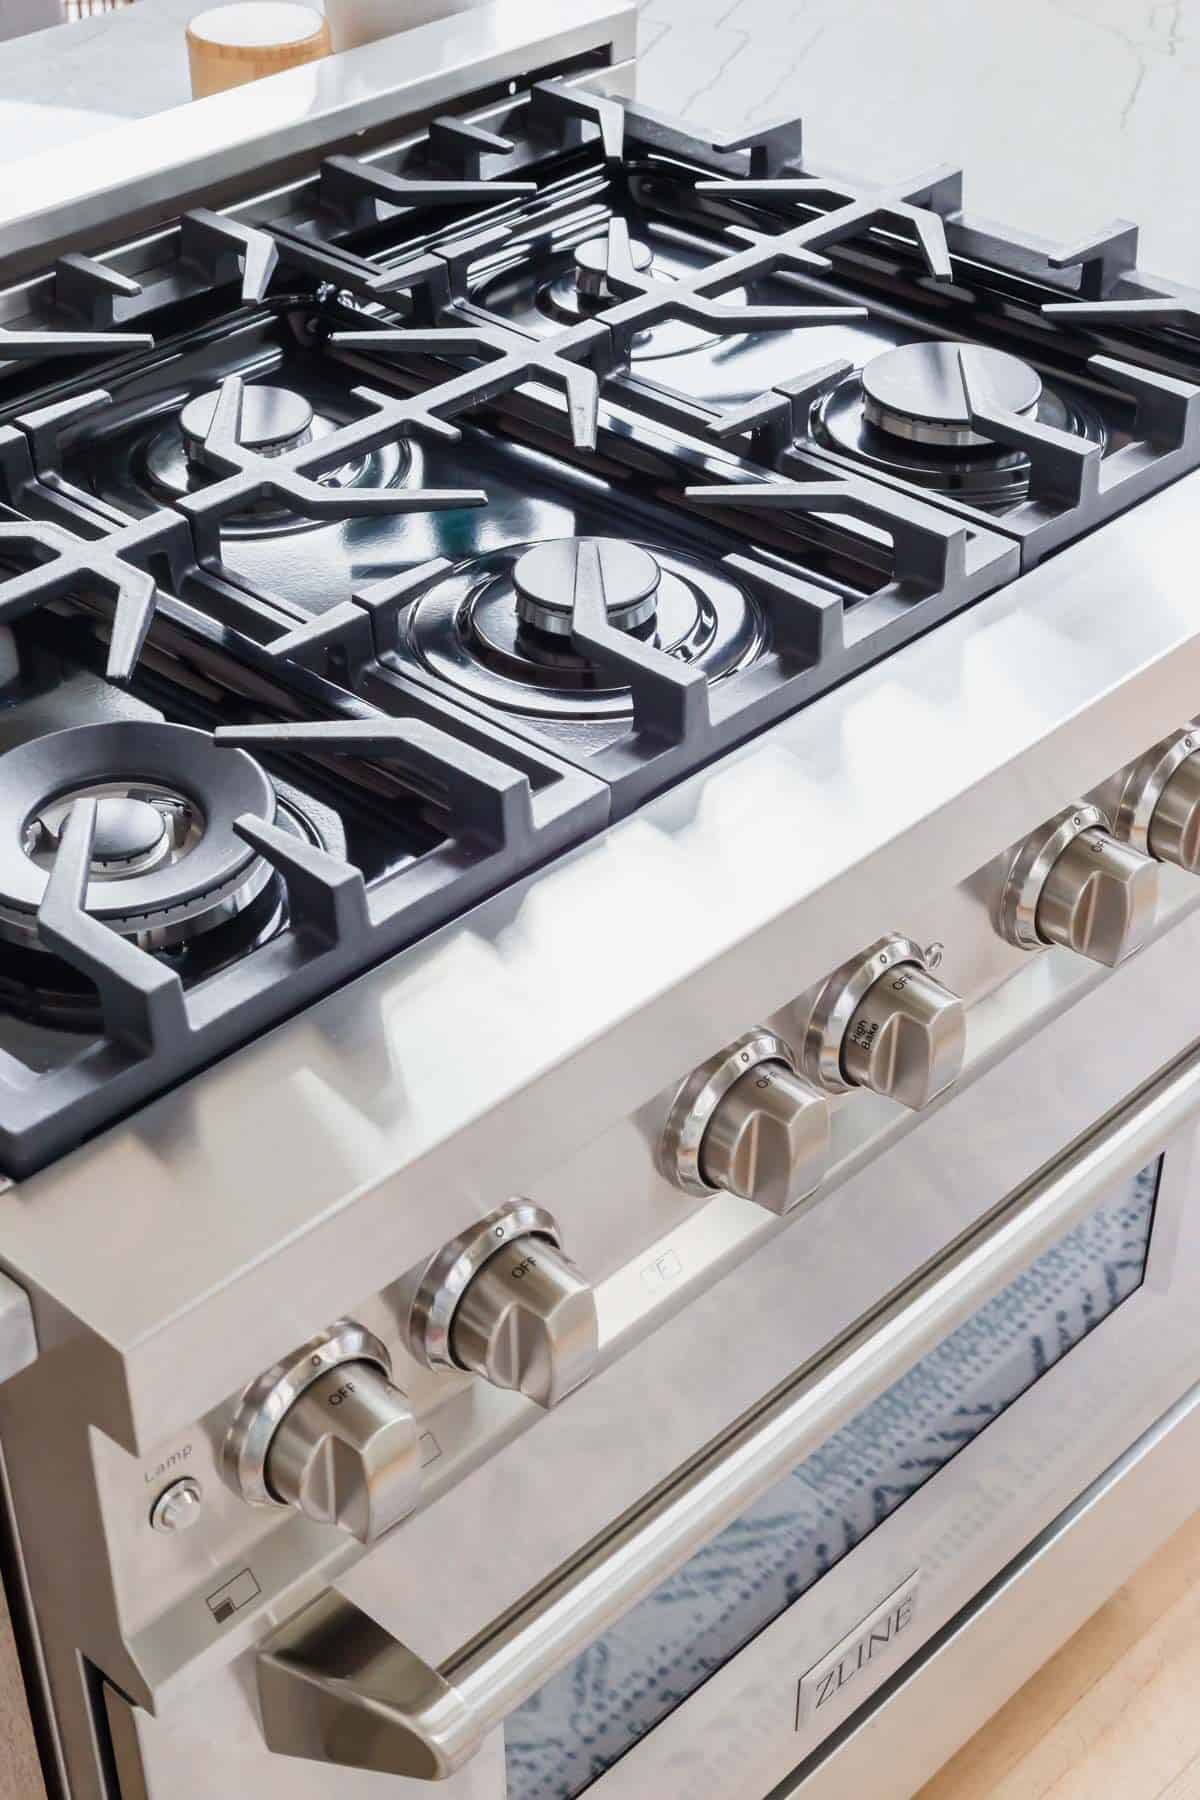 ZLINE 36" dual fuel range cooking top showcasing the Italian burners and cast iron grates.